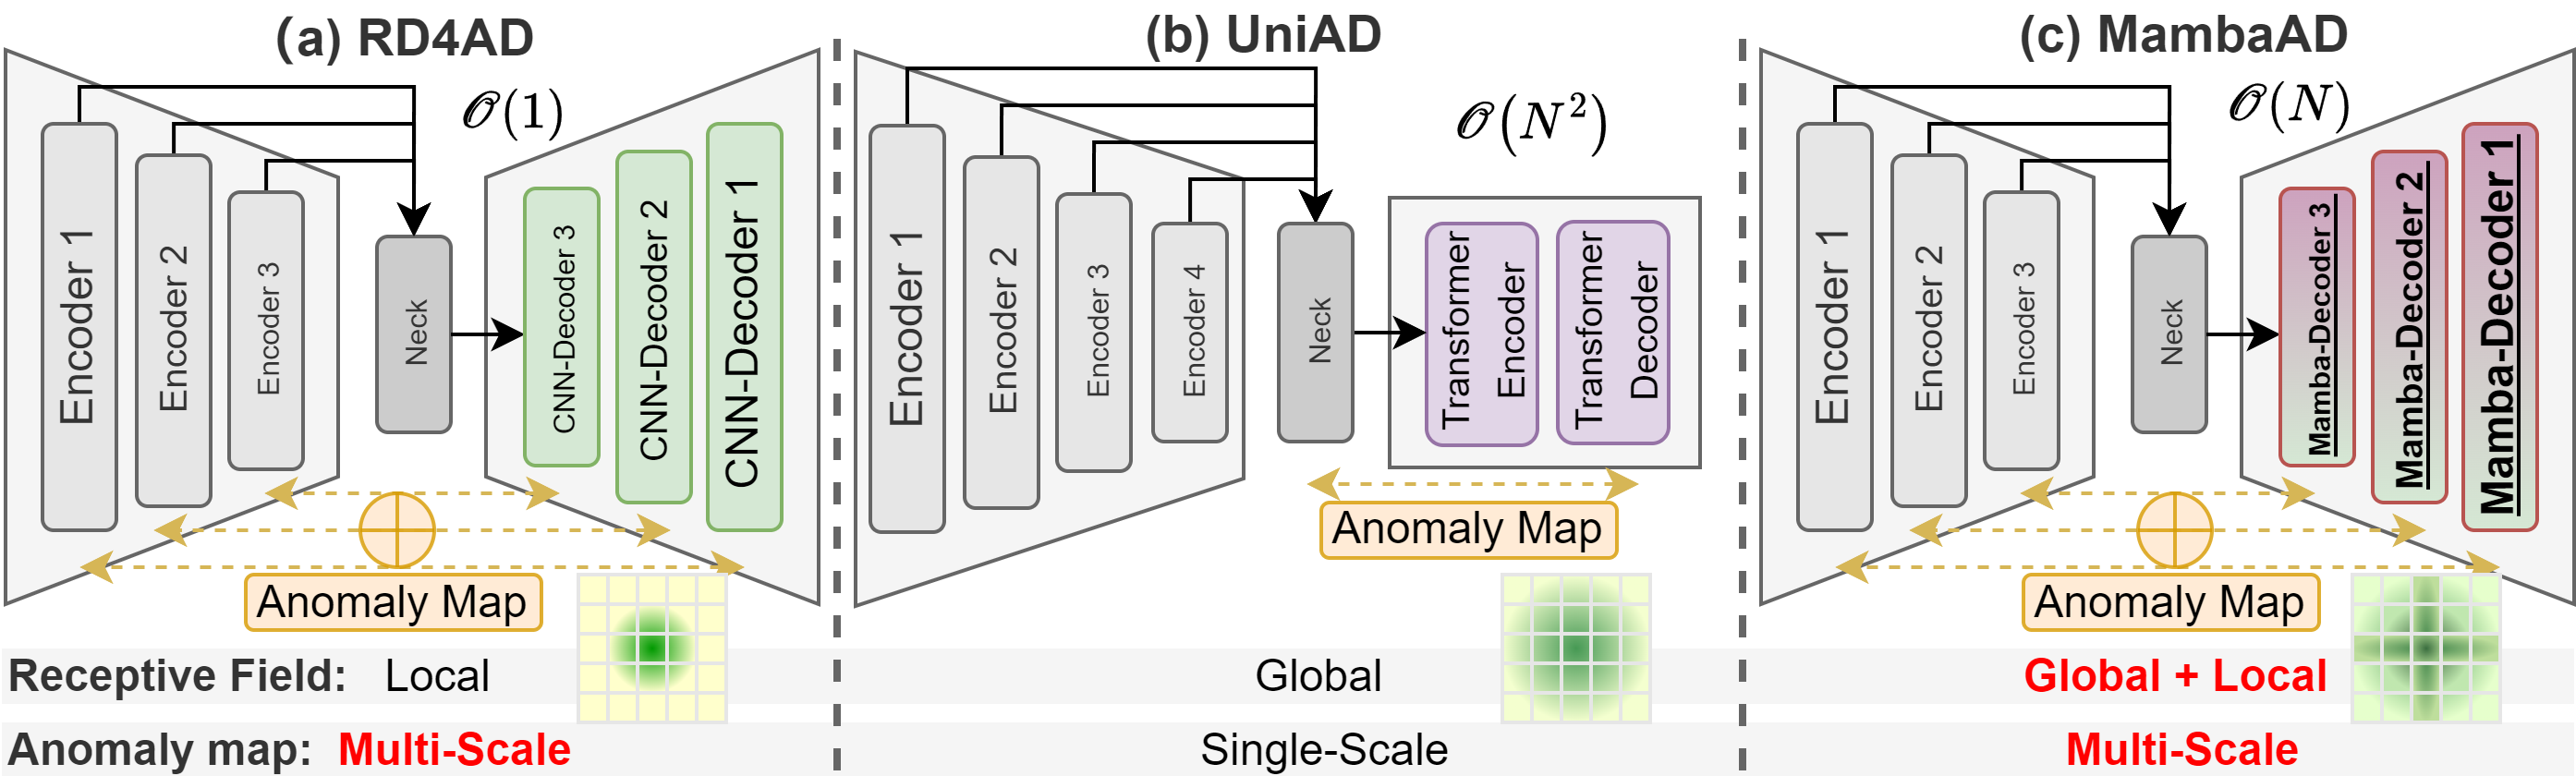 MambaAD: Exploring State Space Models for Multi-class Unsupervised Anomaly Detection